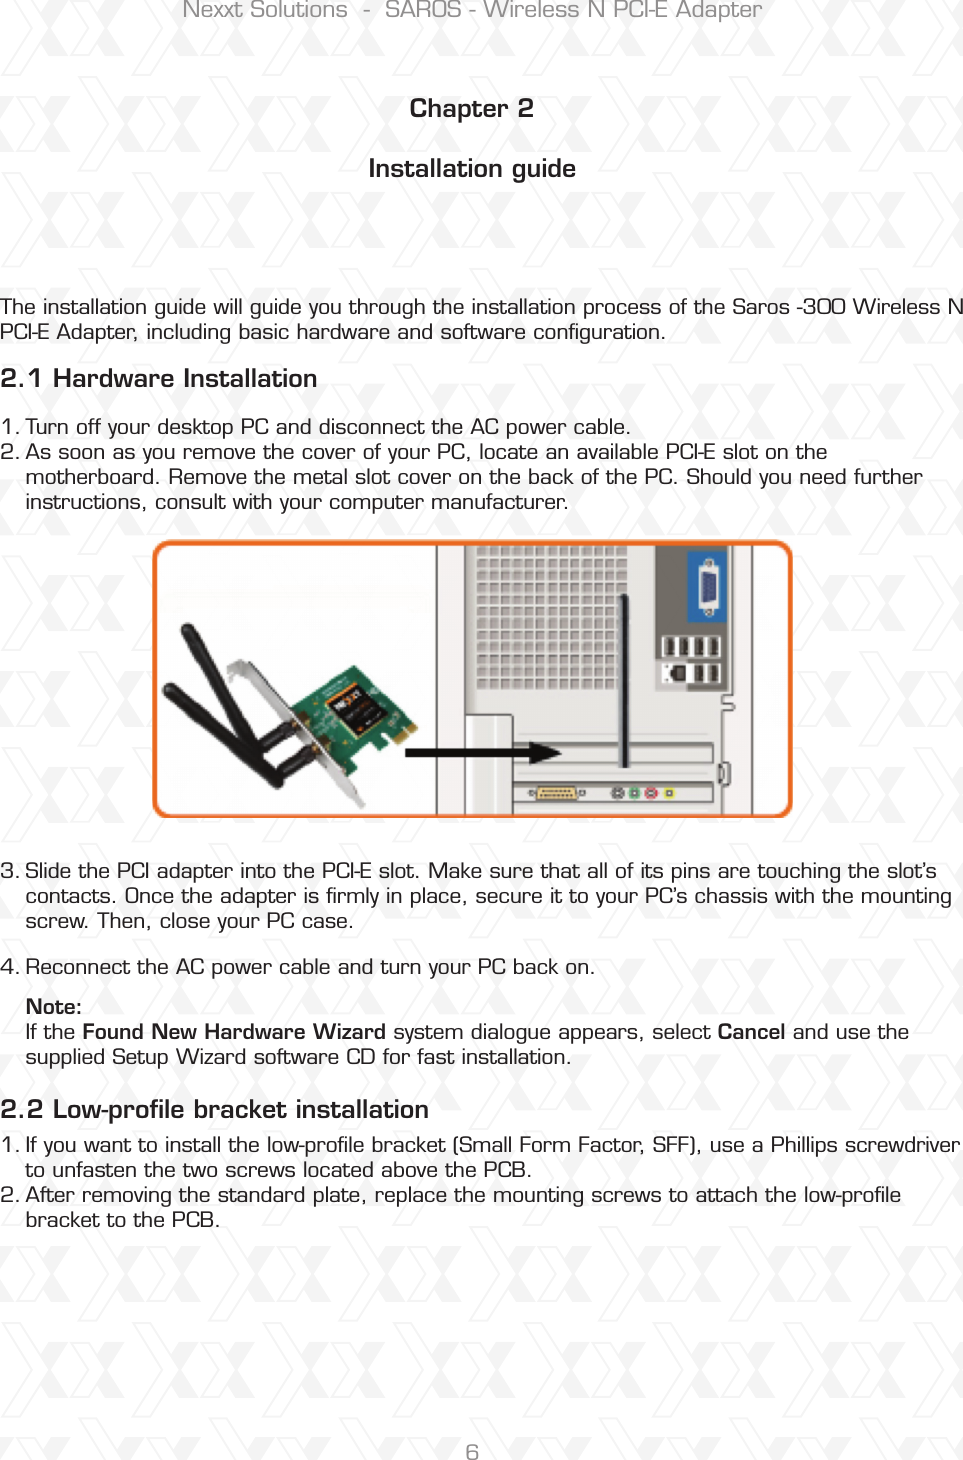 Nexxt Solutions  -  SAROS - Wireless N PCI-E Adapter6Chapter 2Installation guide 2.1 Hardware Installation 2.2 Low-proﬁle bracket installationThe installation guide will guide you through the installation process of the Saros -300 Wireless N PCI-E Adapter, including basic hardware and software conﬁguration.Turn off your desktop PC and disconnect the AC power cable. As soon as you remove the cover of your PC, locate an available PCI-E slot on the motherboard. Remove the metal slot cover on the back of the PC. Should you need further instructions, consult with your computer manufacturer.If you want to install the low-prole bracket (Small Form Factor, SFF), use a Phillips screwdriver to unfasten the two screws located above the PCB.After removing the standard plate, replace the mounting screws to attach the low-proﬁle bracket to the PCB.Slide the PCI adapter into the PCI-E slot. Make sure that all of its pins are touching the slot’s contacts. Once the adapter is ﬁrmly in place, secure it to your PC’s chassis with the mounting screw. Then, close your PC case. Reconnect the AC power cable and turn your PC back on. Note:If the Found New Hardware Wizard system dialogue appears, select Cancel and use the supplied Setup Wizard software CD for fast installation.1.2.1.2.3.4.